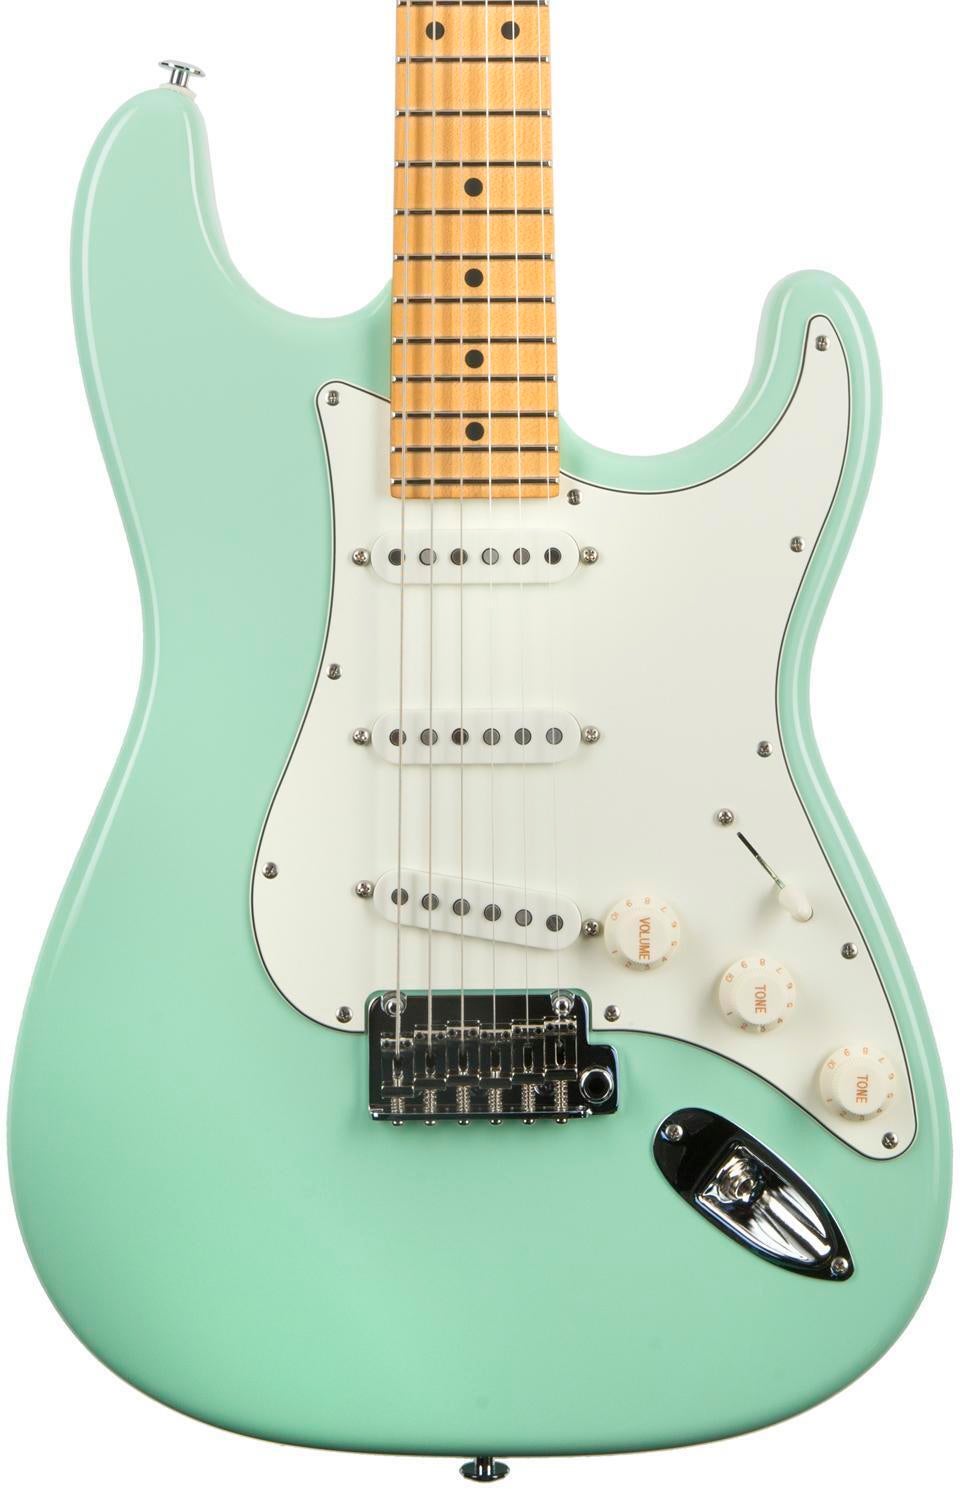 Suhr Classic S SSS Electric Guitar - Surf Green with Maple Fingerboard